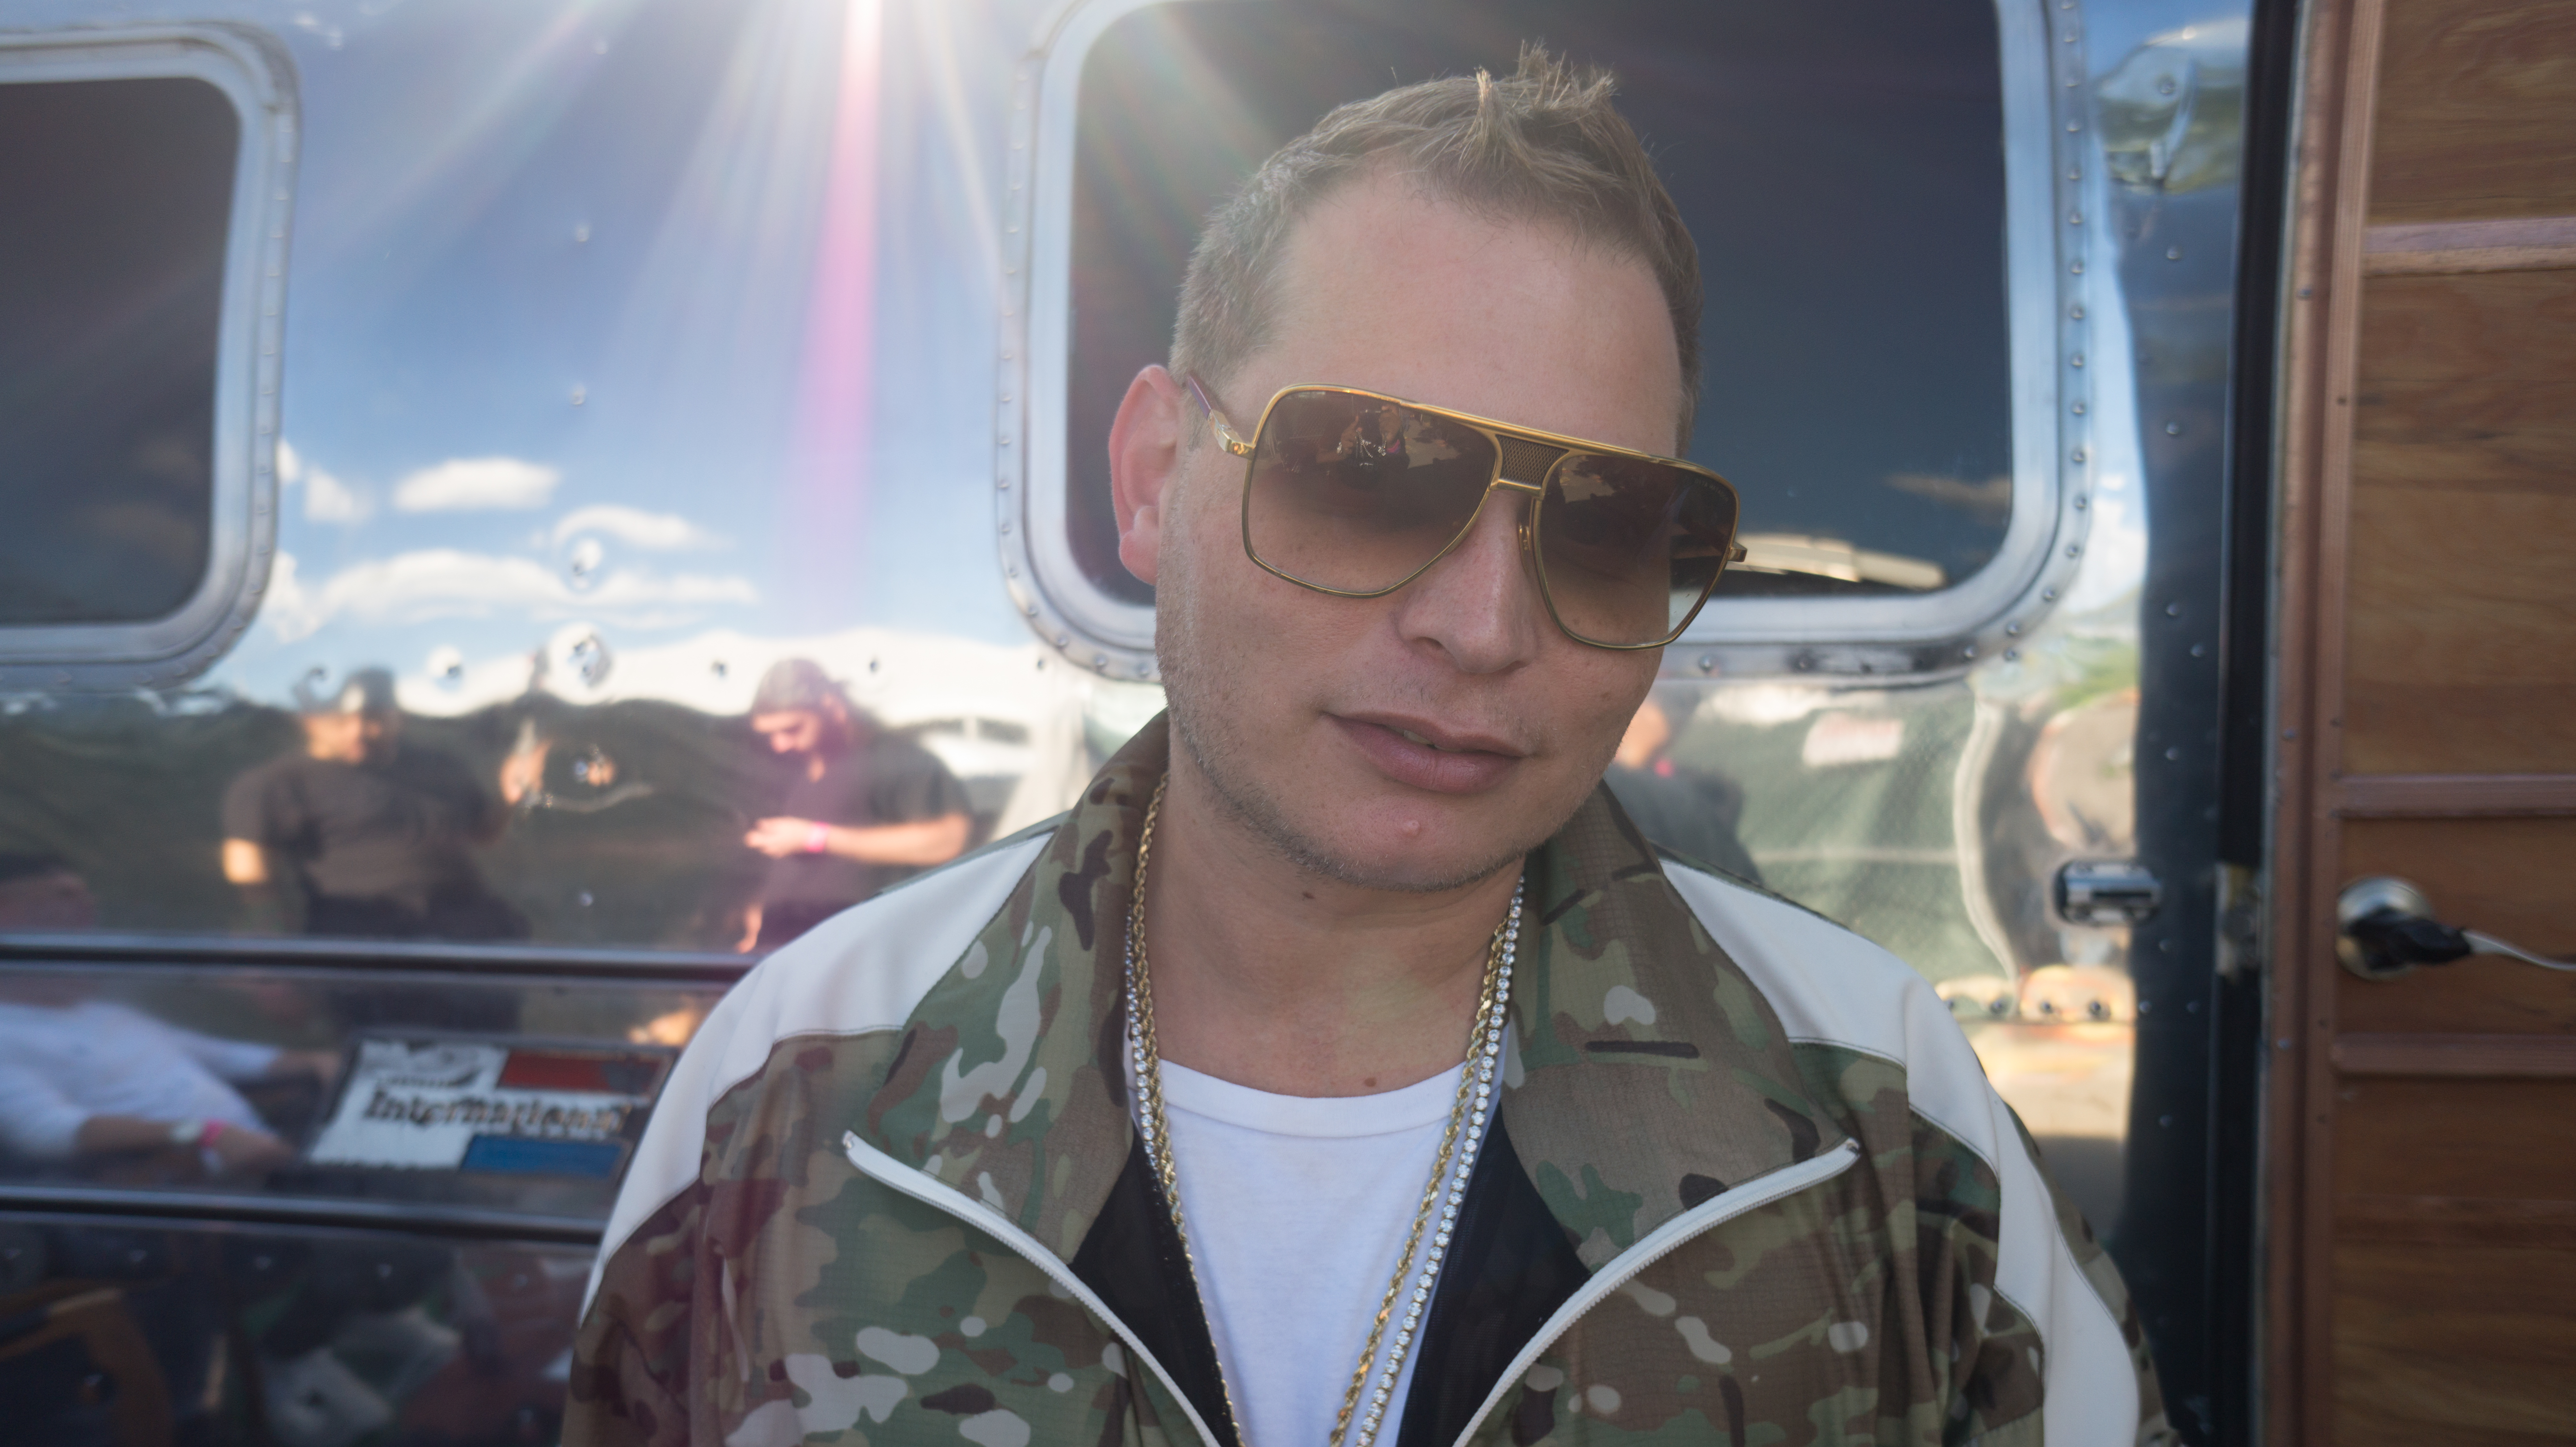 Exclusive!! Scott Storch gives directions on how to load his